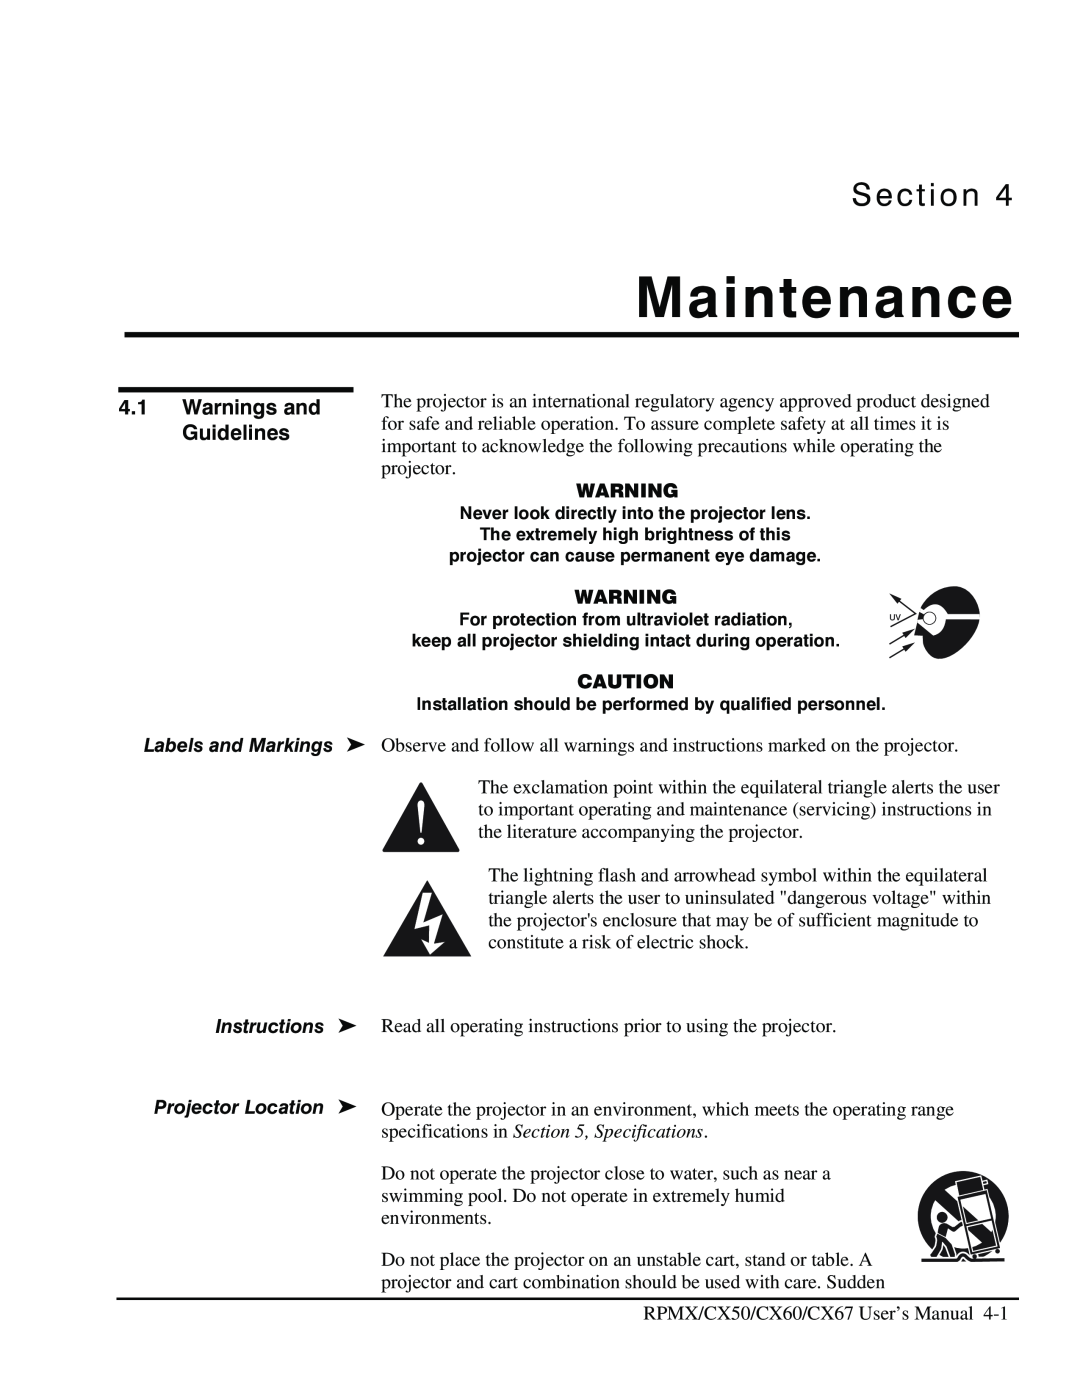 Christie Digital Systems CX60, CX50, CX67 user manual Maintenance, Warnings and Guidelines, Section 